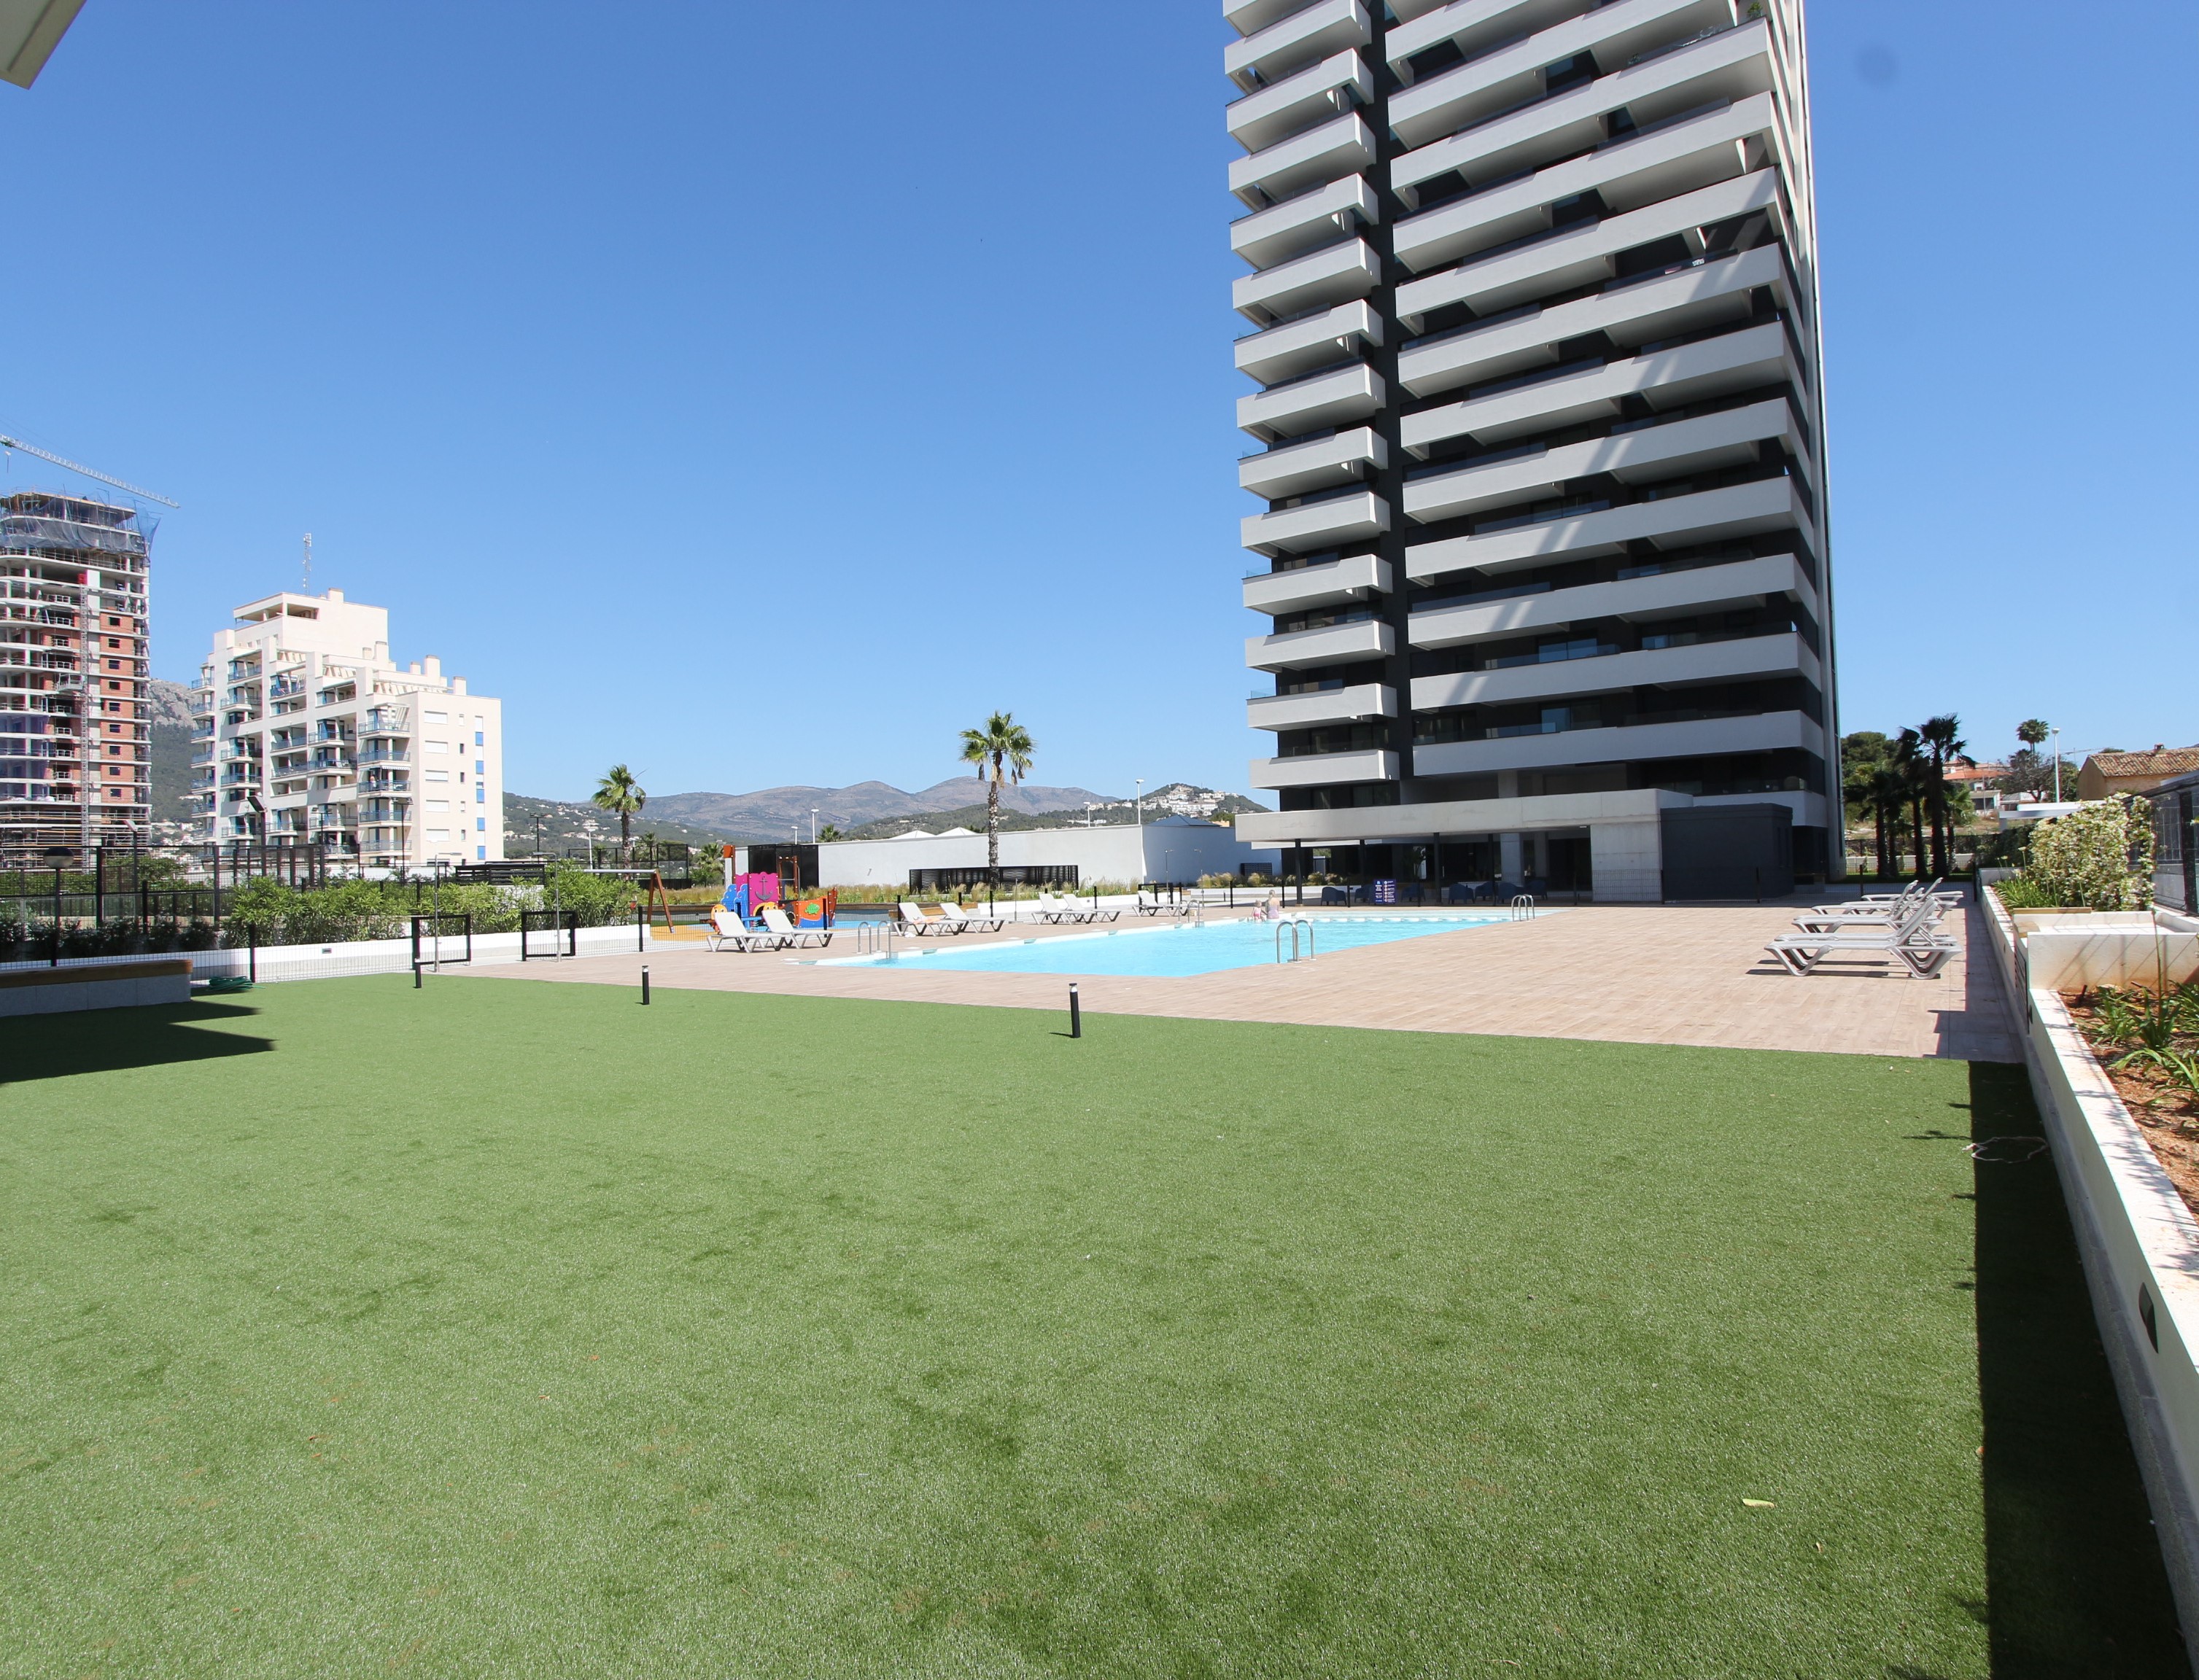 NEW APARTMENT FOR SALE IN CALPE, 3 BEDROOMS, RESIDENTIAL WITH LARGE GARDEN AREAS.